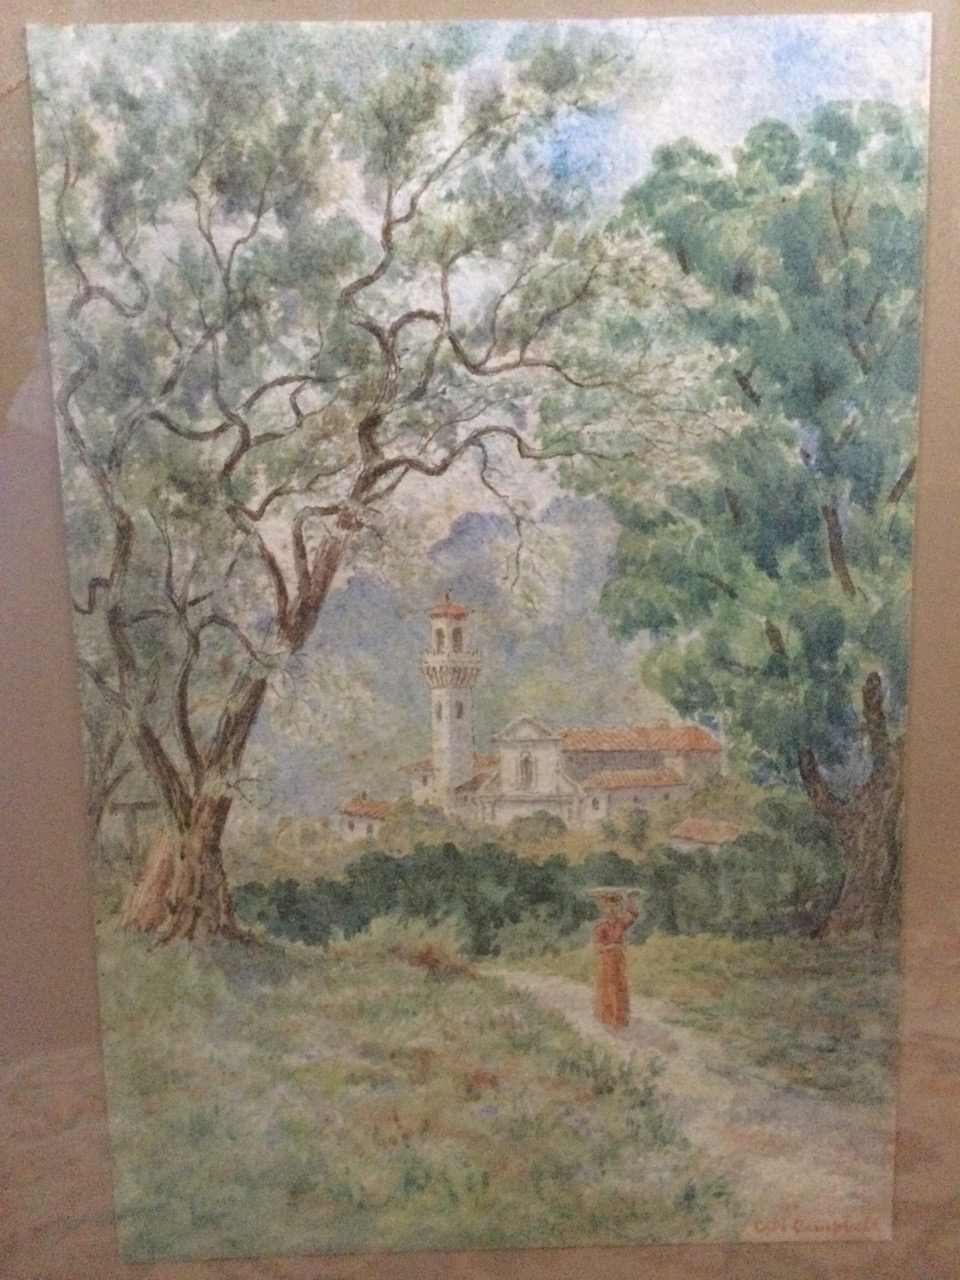 CN Campbell, watercolour, landscape with figure on path, signed, laid down & framed. (7.5in x 11. - Image 3 of 3